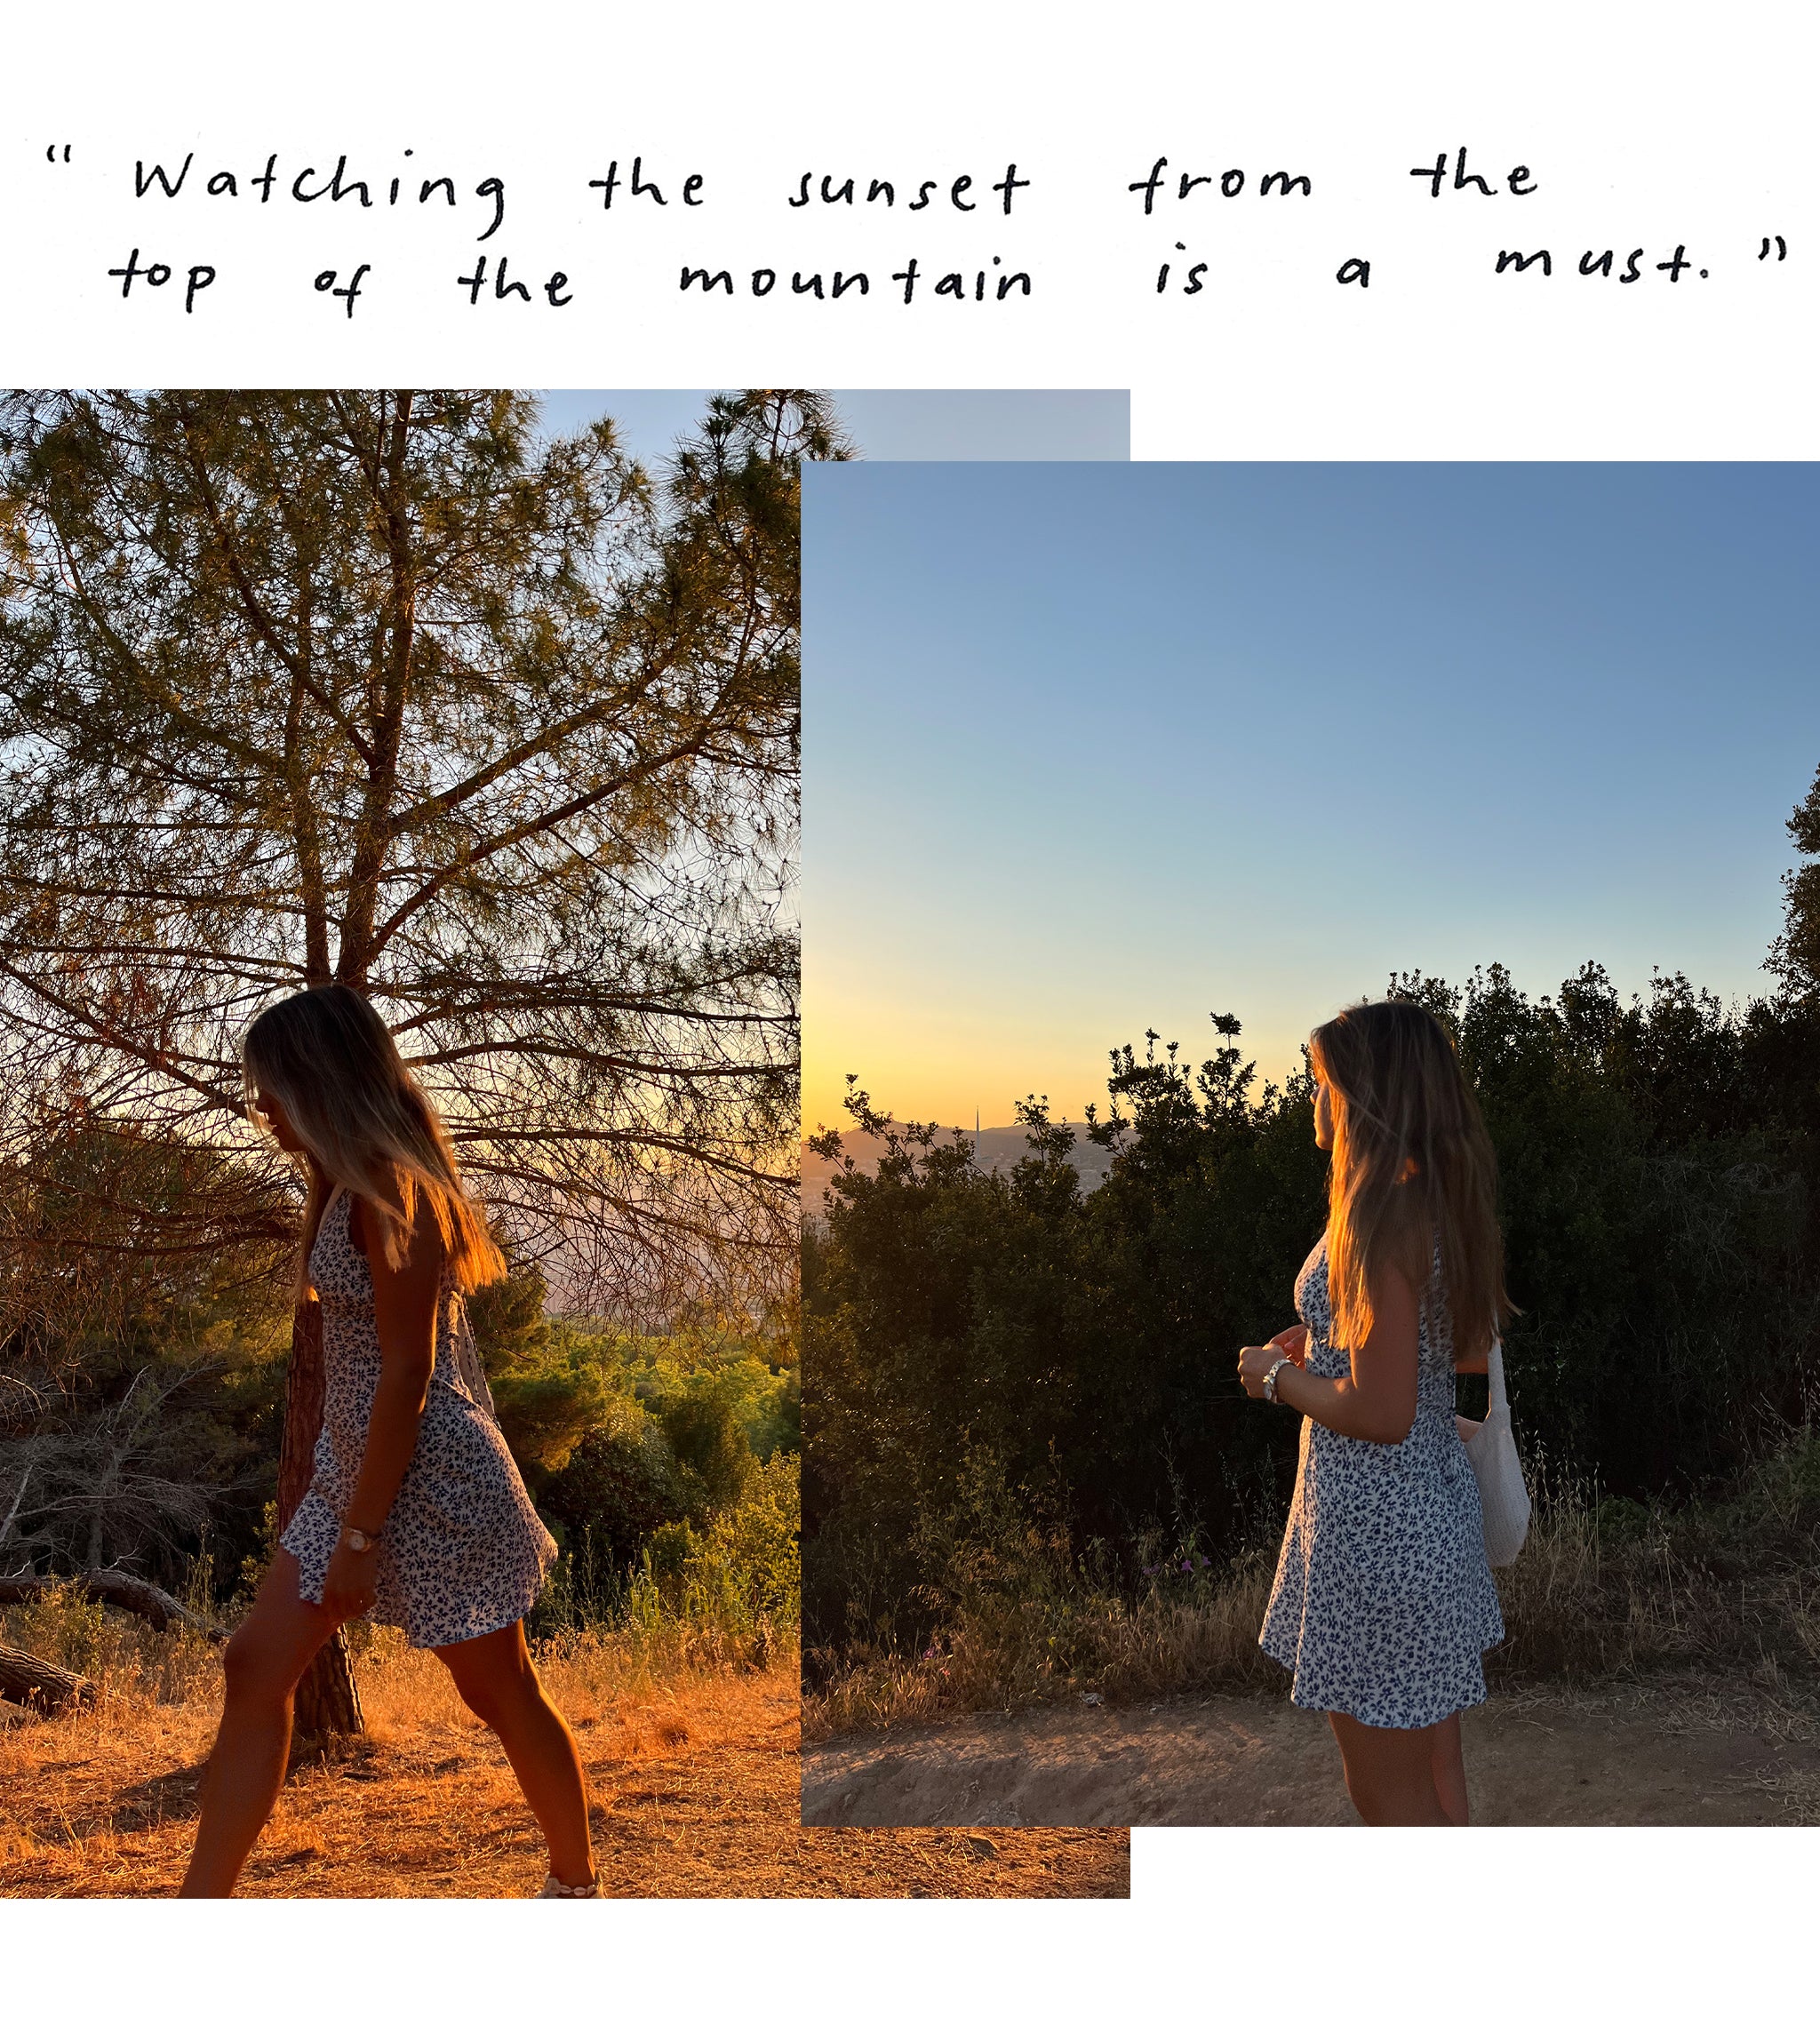 “Watching the sunset from the top of the mountain is a must.”